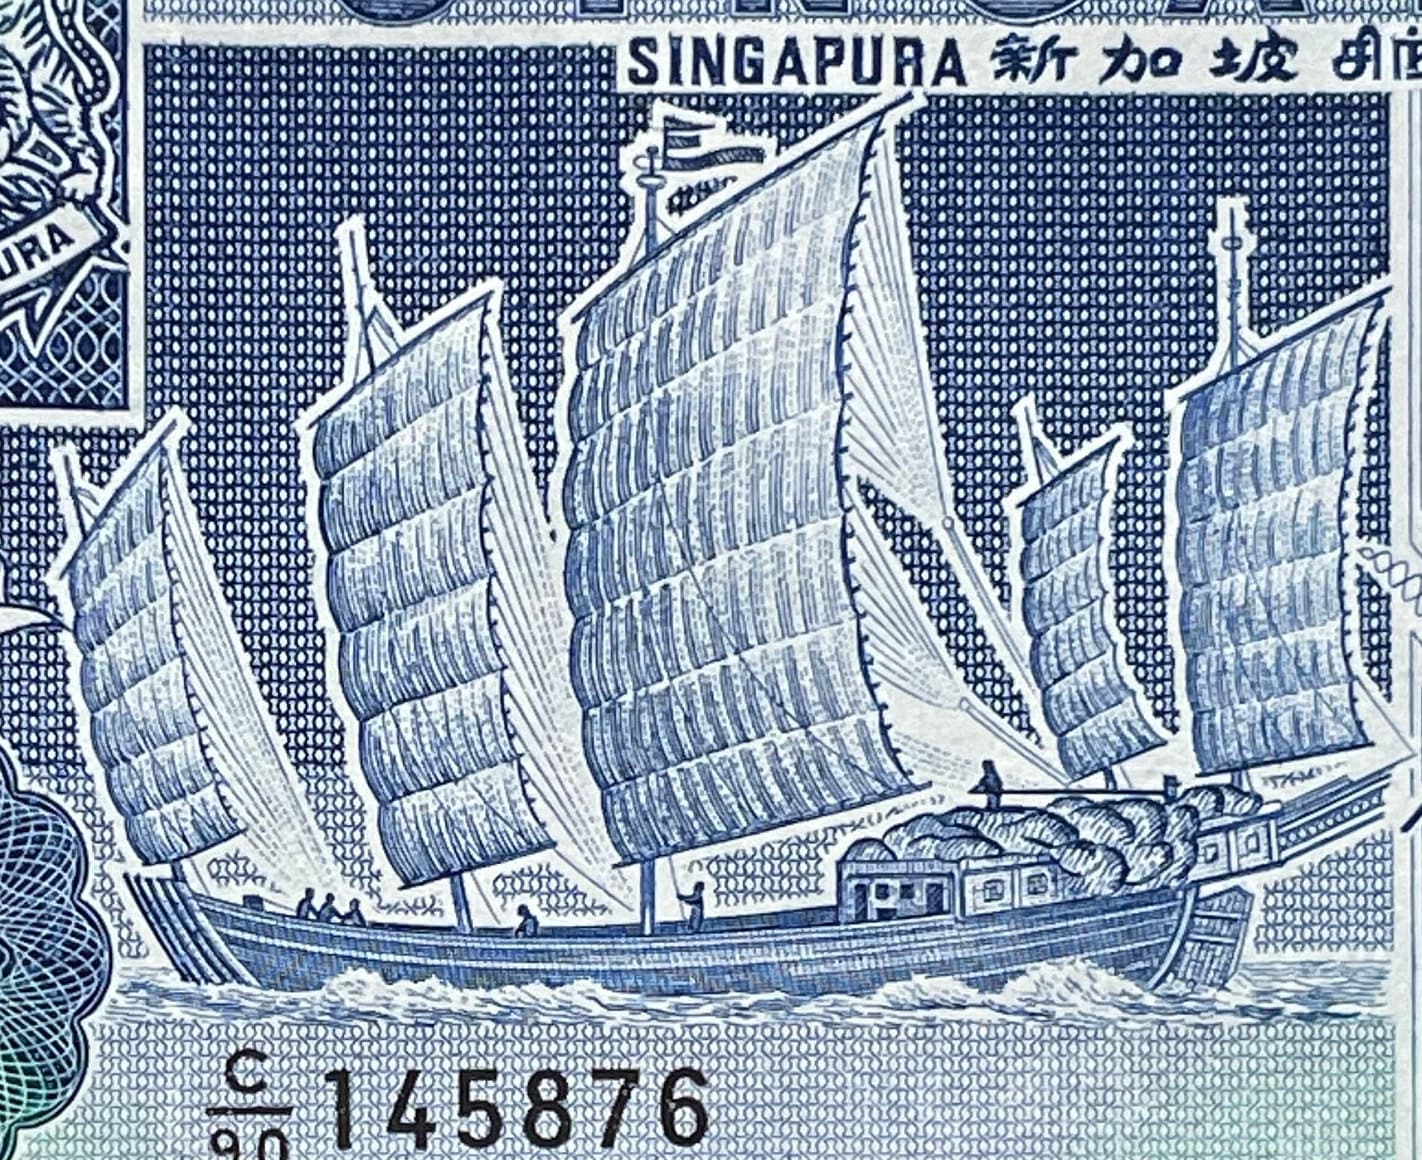 Sha-ch'uan Trading Junk & Sentosa Satellite Earth Station 1 Dollar Singapore Authentic Banknote Money for Jewelry and Collage (Orchid) 1987